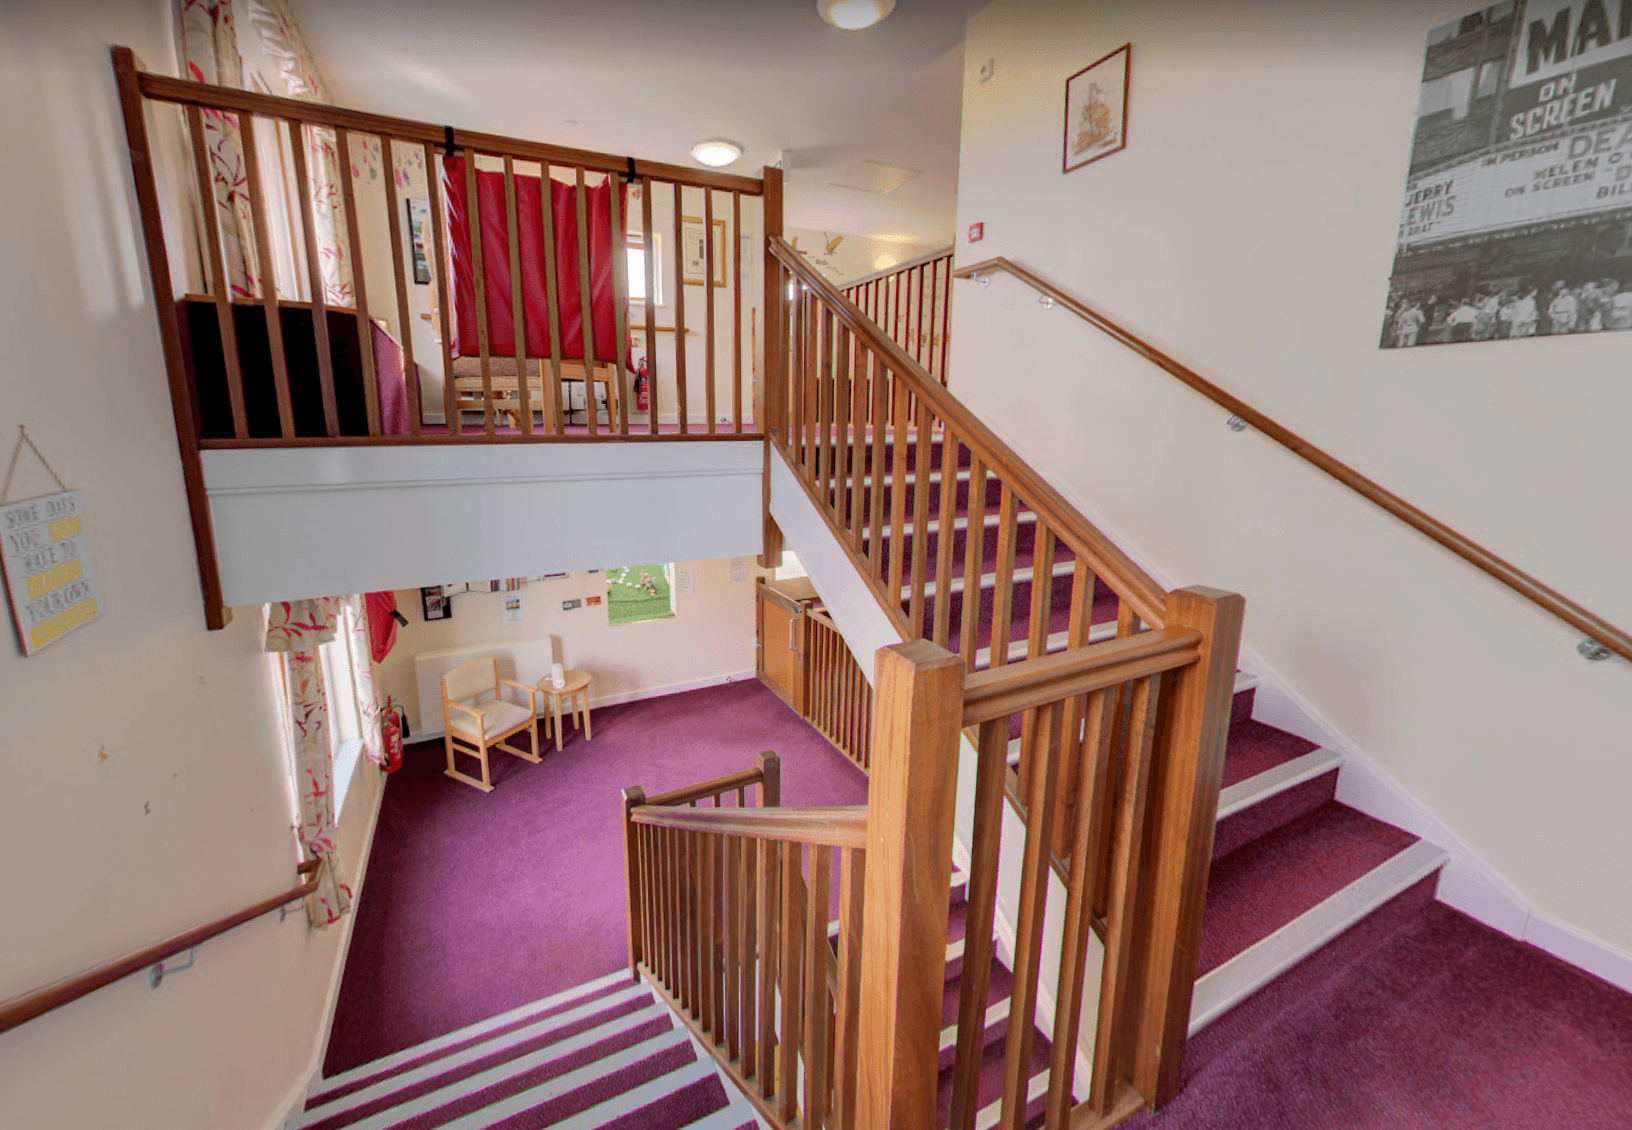 Shaw Healthcare - The Martlets care home 003